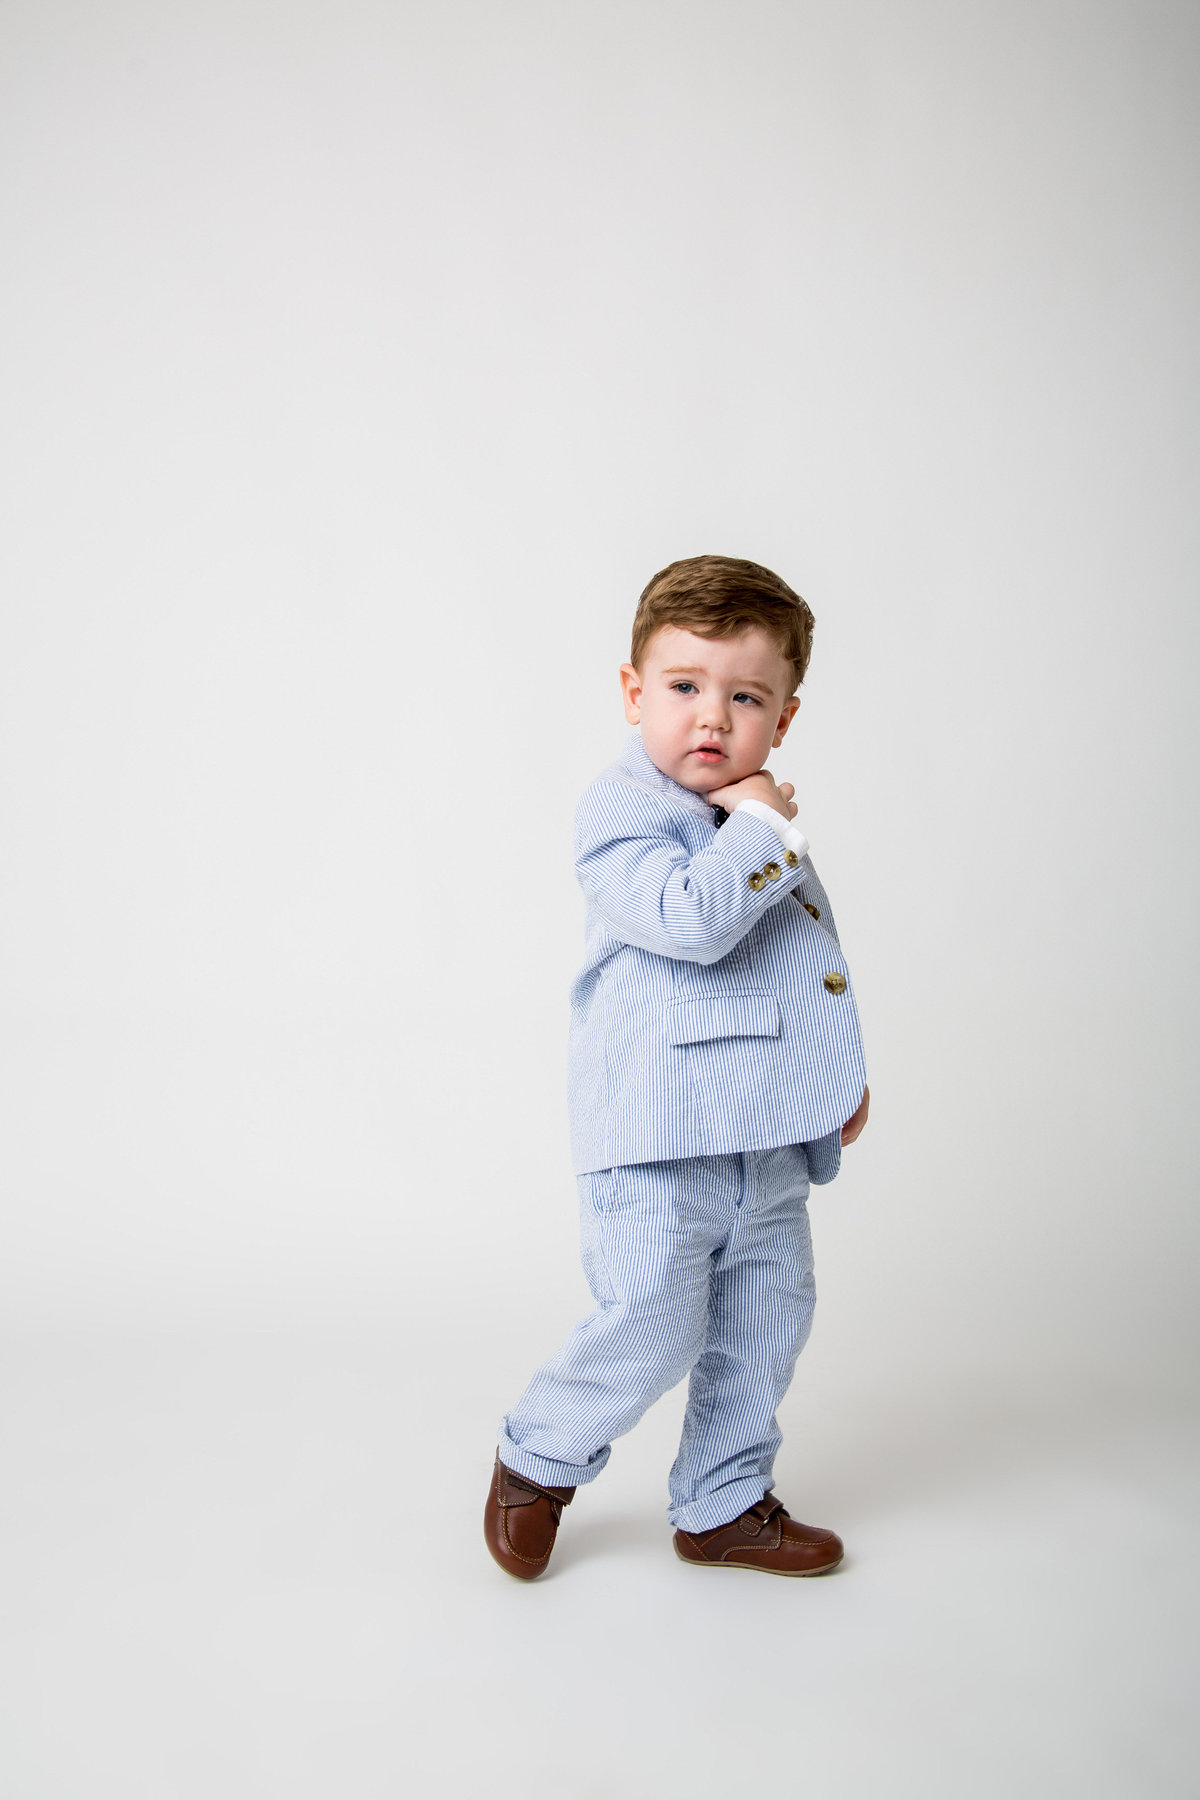 photo of baby toddler wearing blue and white pinstripe suit taken by San Antonio Photographer Expose The Heart Photographer